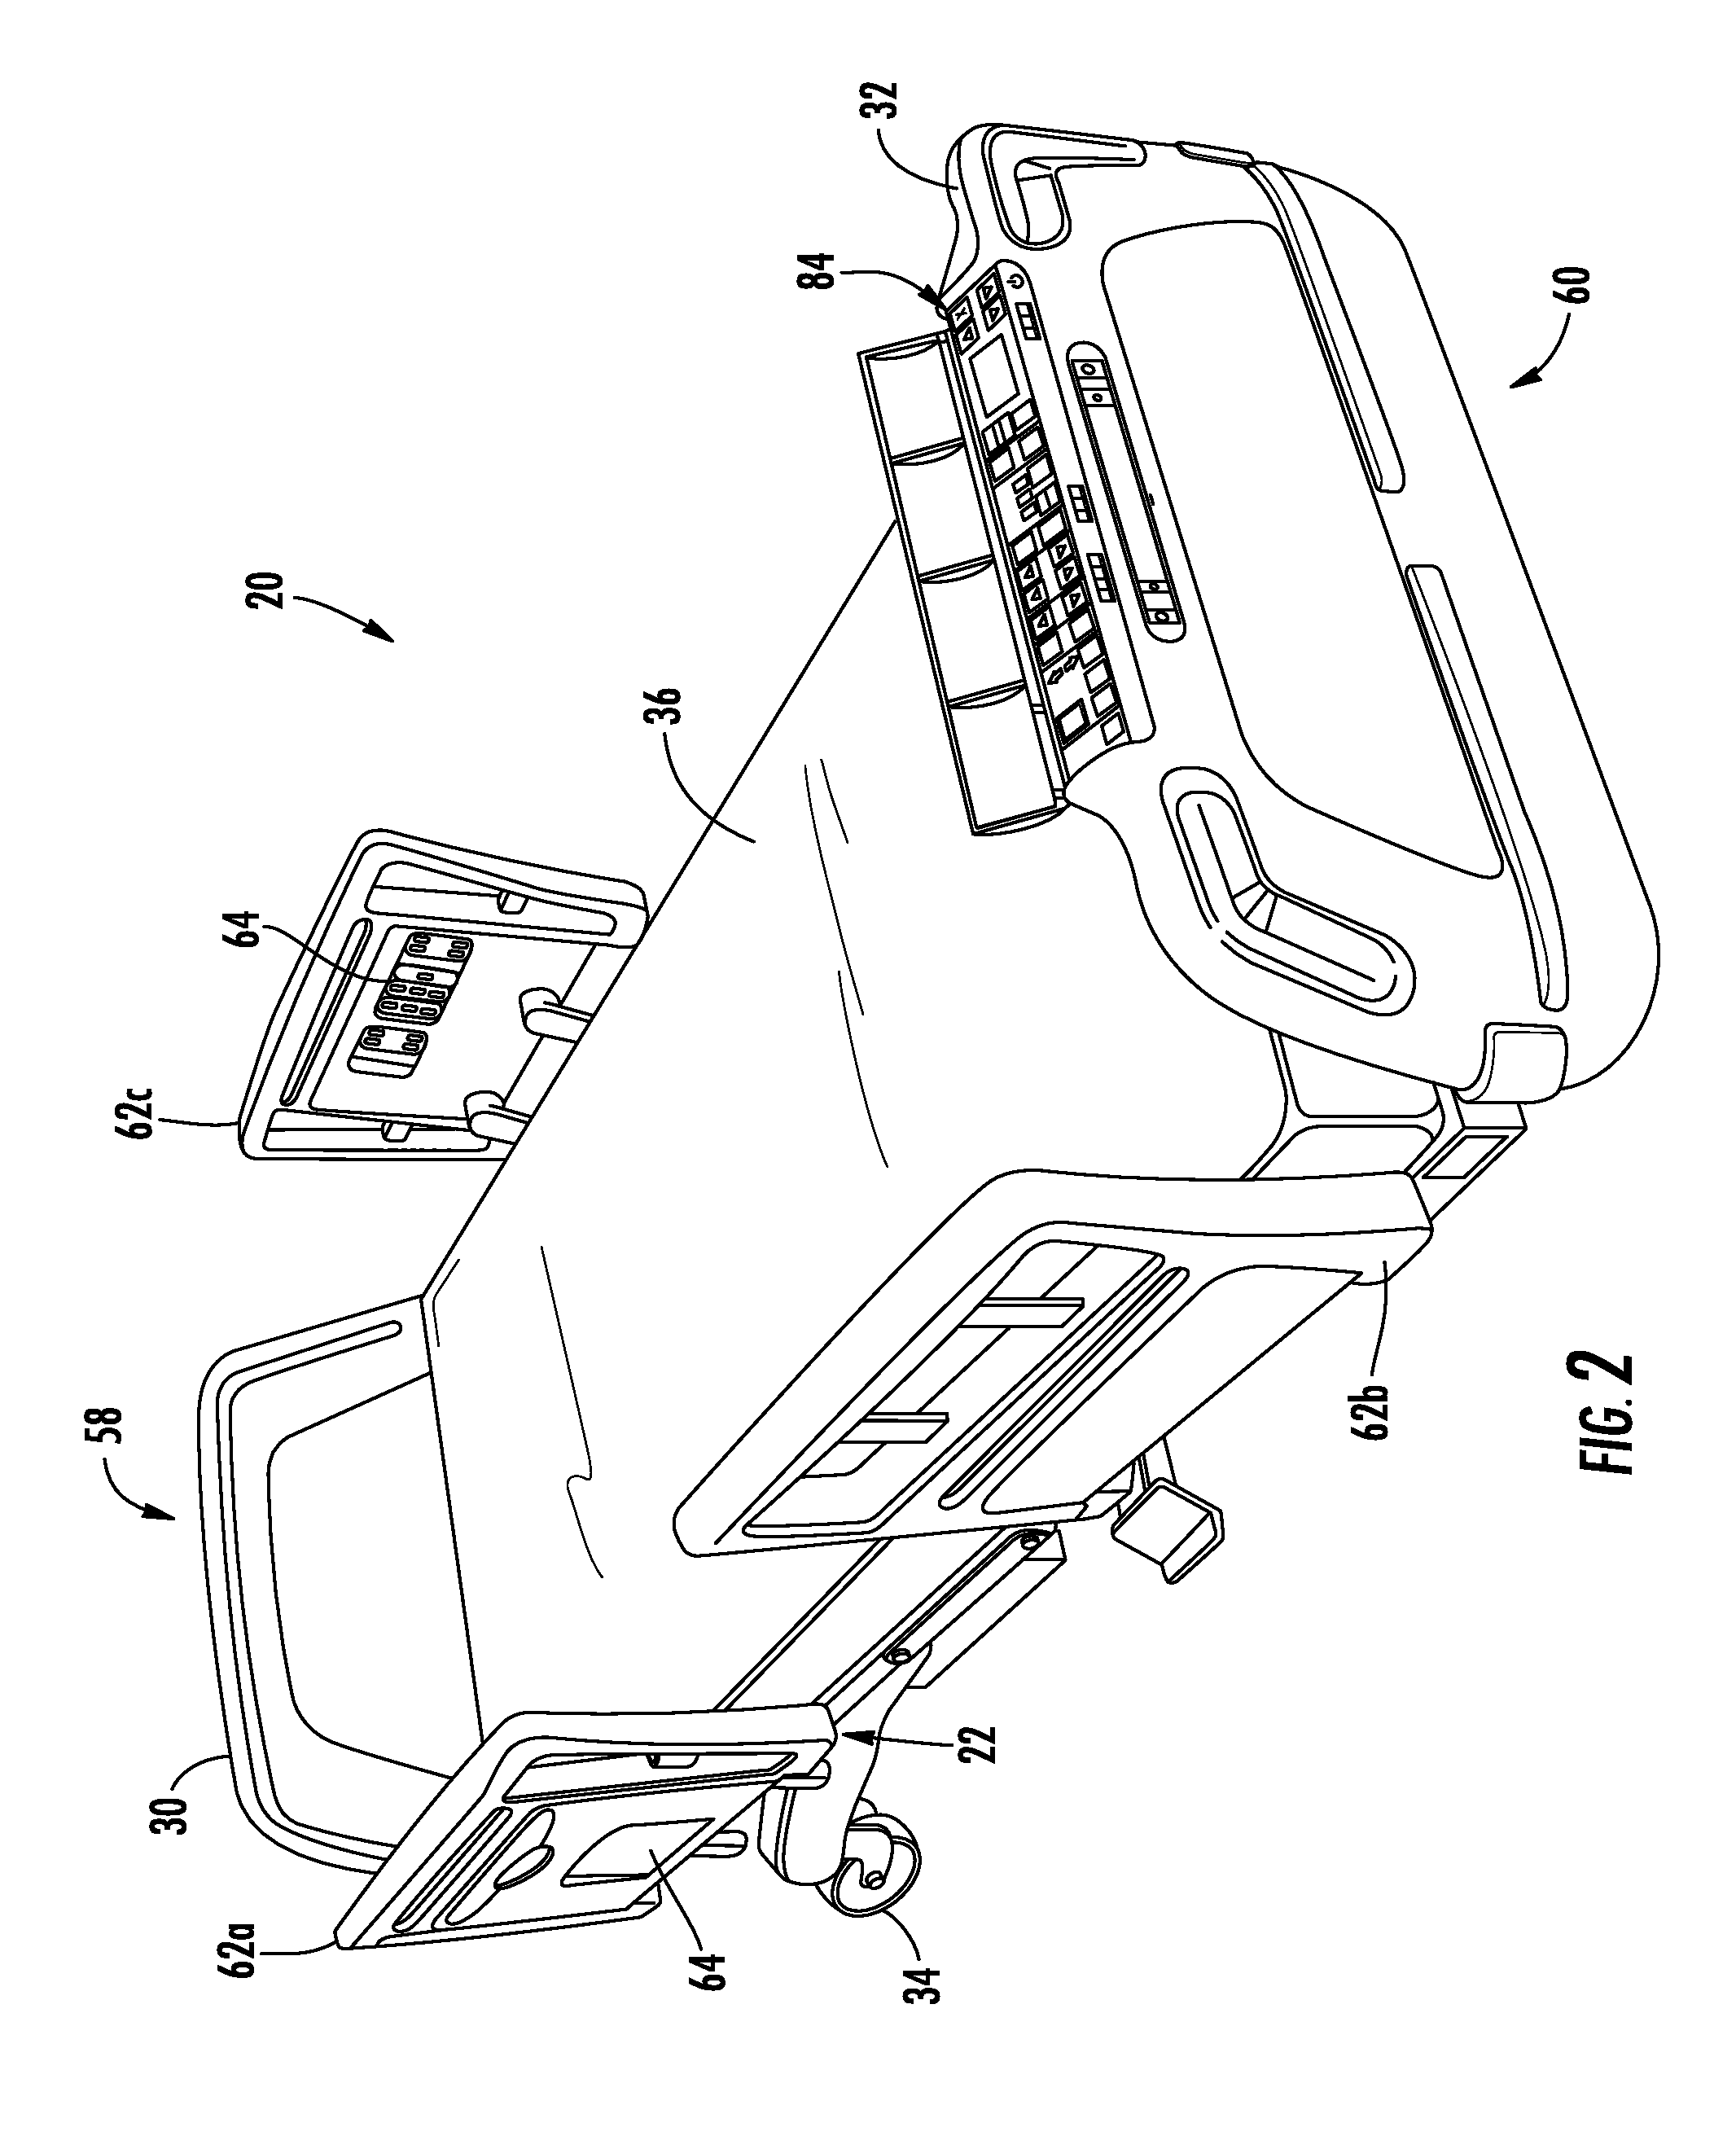 Patient support apparatus and controls therefor